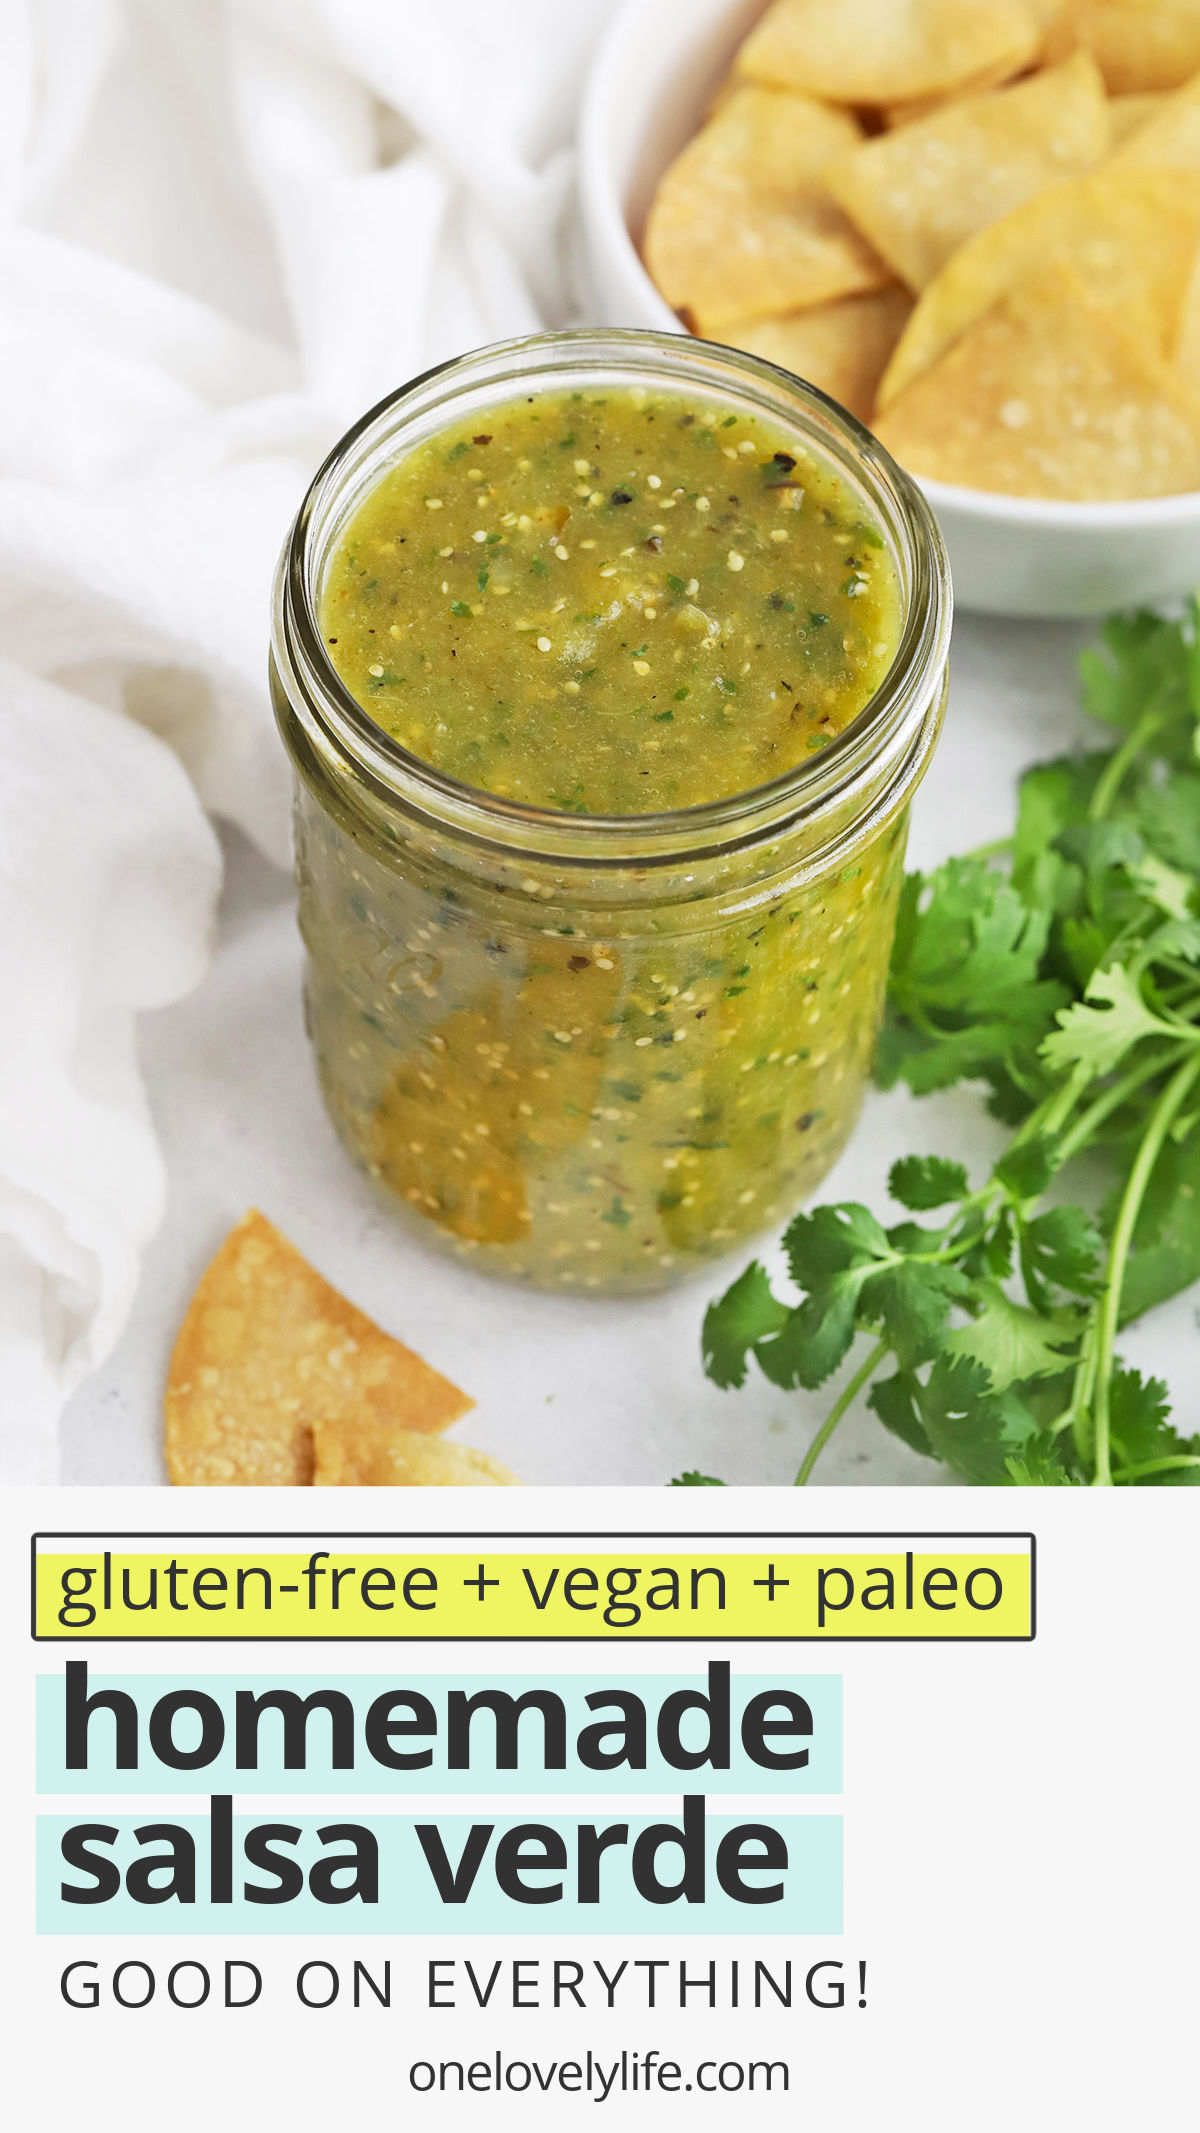 Homemade Salsa Verde - Made with tomatillos, this fresh green salsa is good on just about anything! Don't miss all our favorite ways to use it below. (Naturally vegan, paleo, and gluten-free) // Green Salsa Recipe // Salsa Verde Recipe // Tomatillo Salsa Recipe // Paleo Salsa // Vegan Salsa // Healthy Dip //